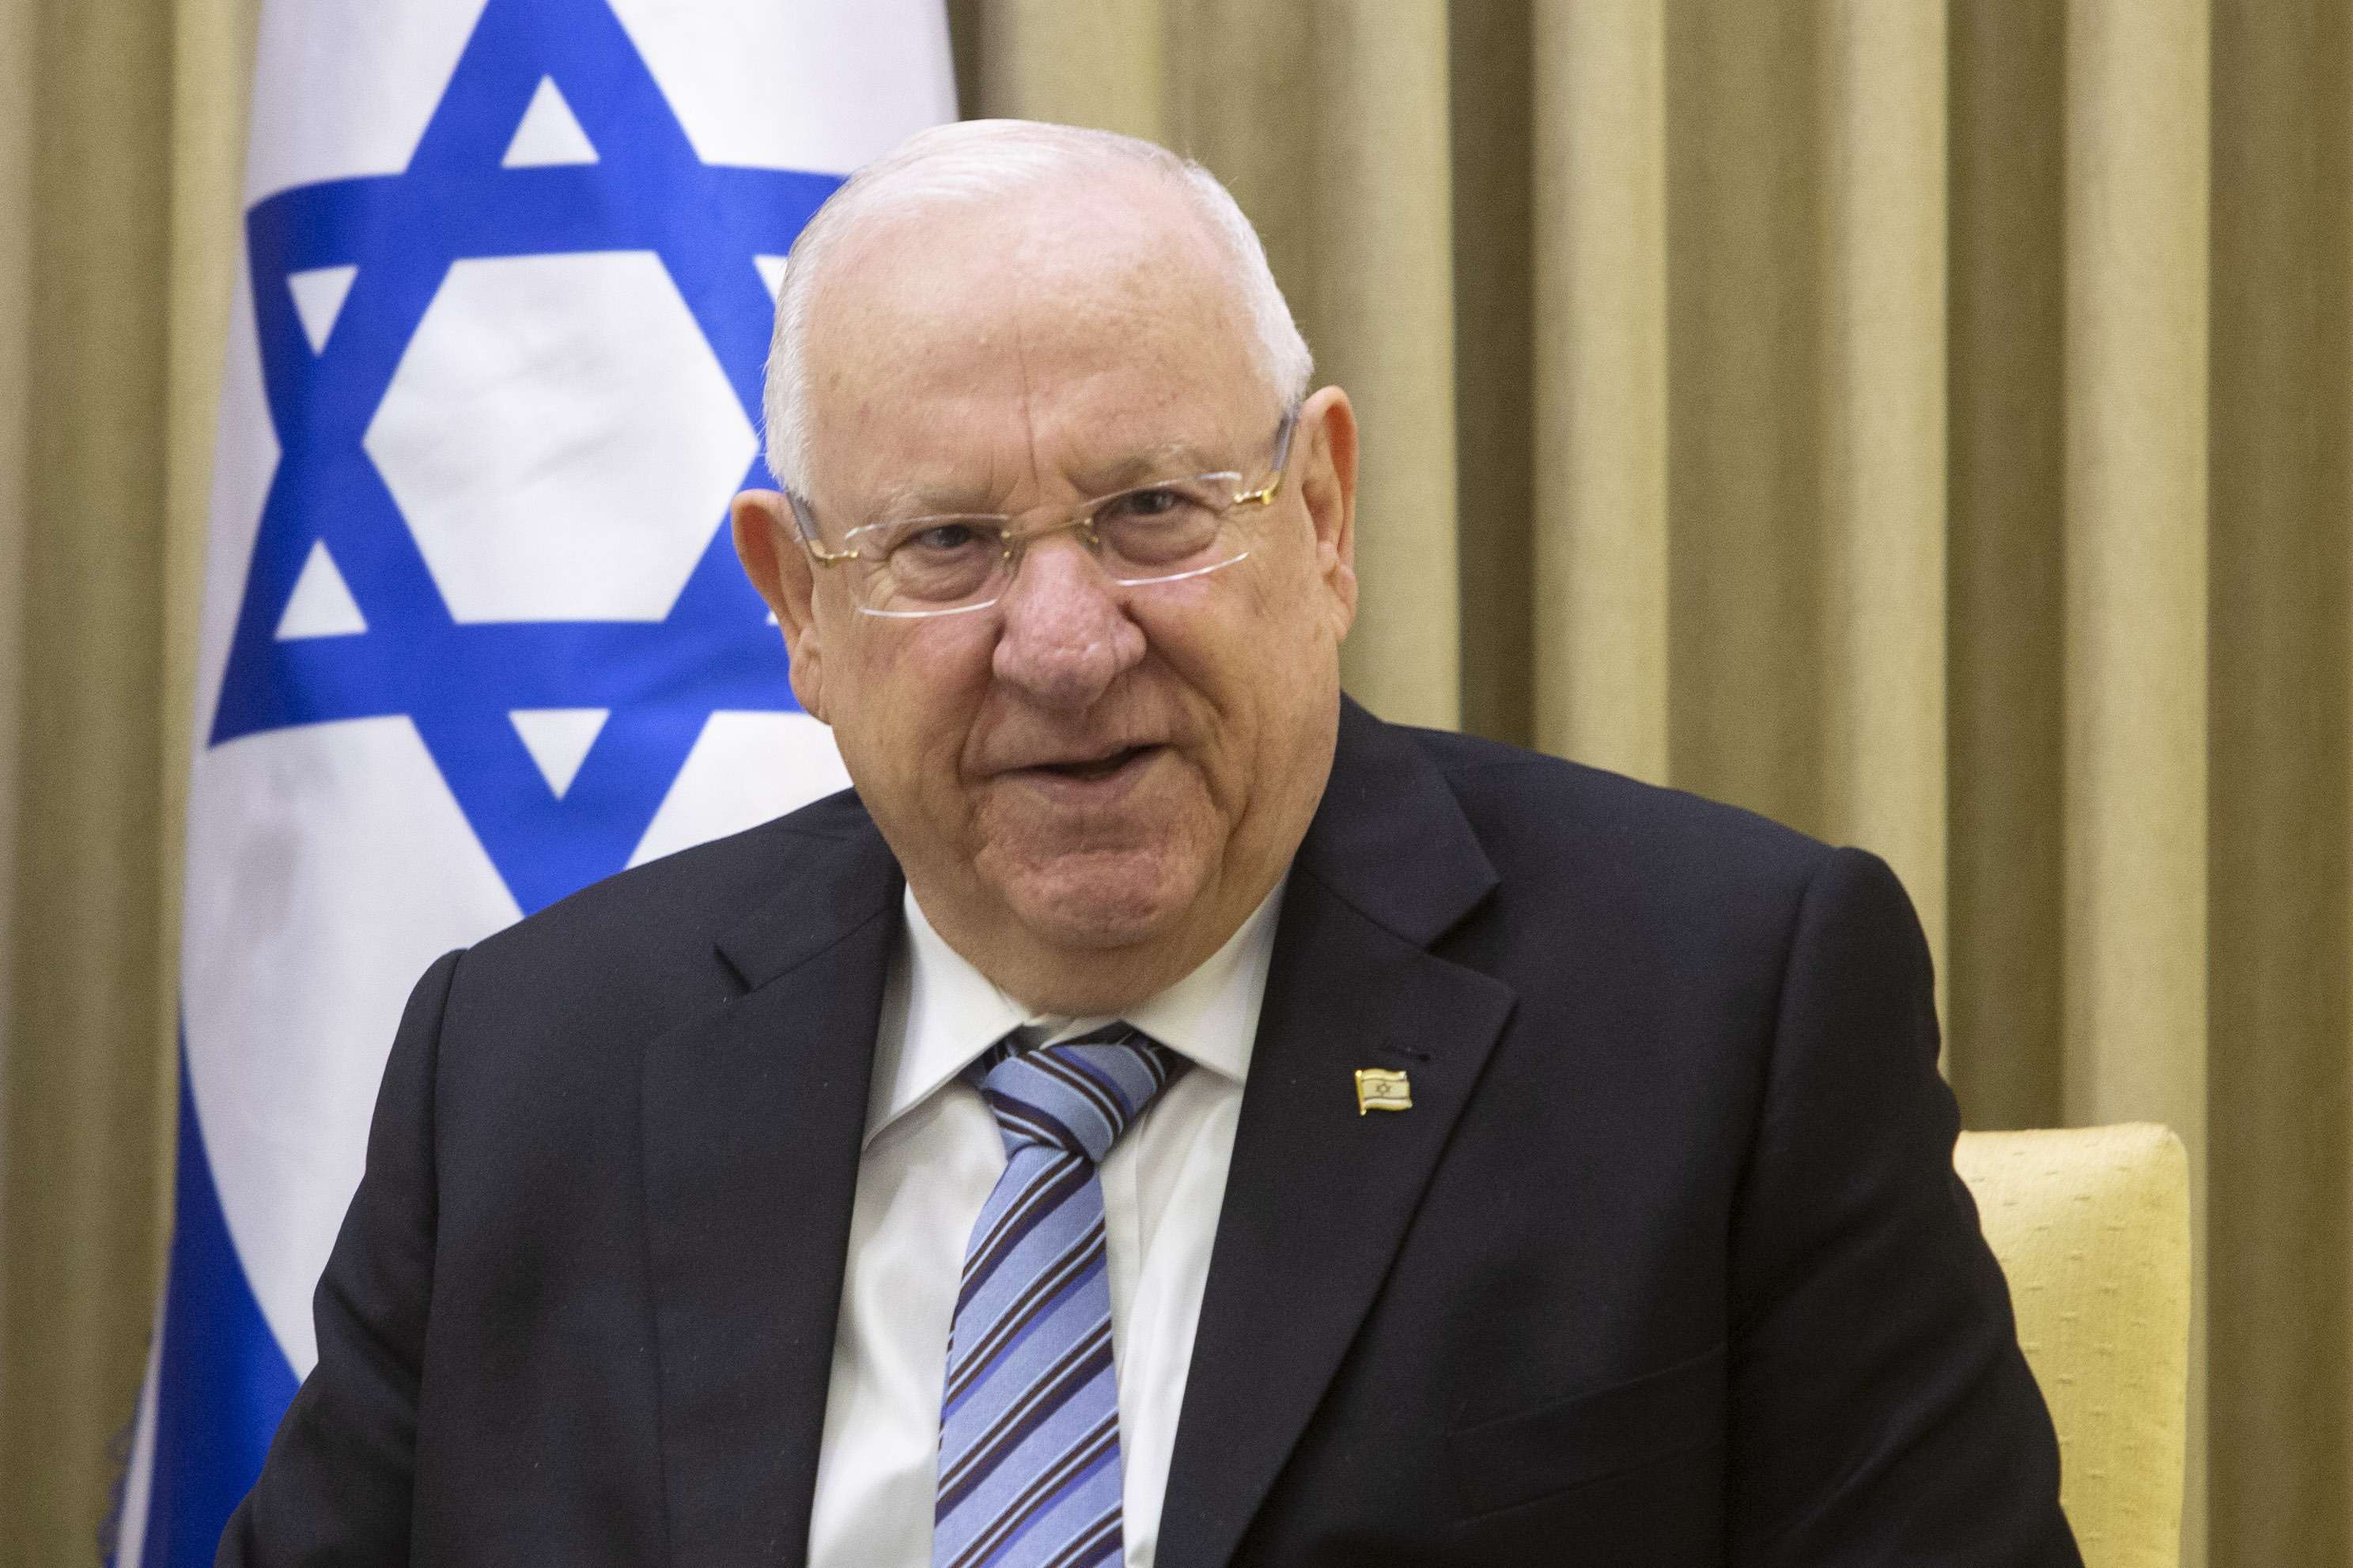 Rivlin would "make every effort to prevent a third set of elections"